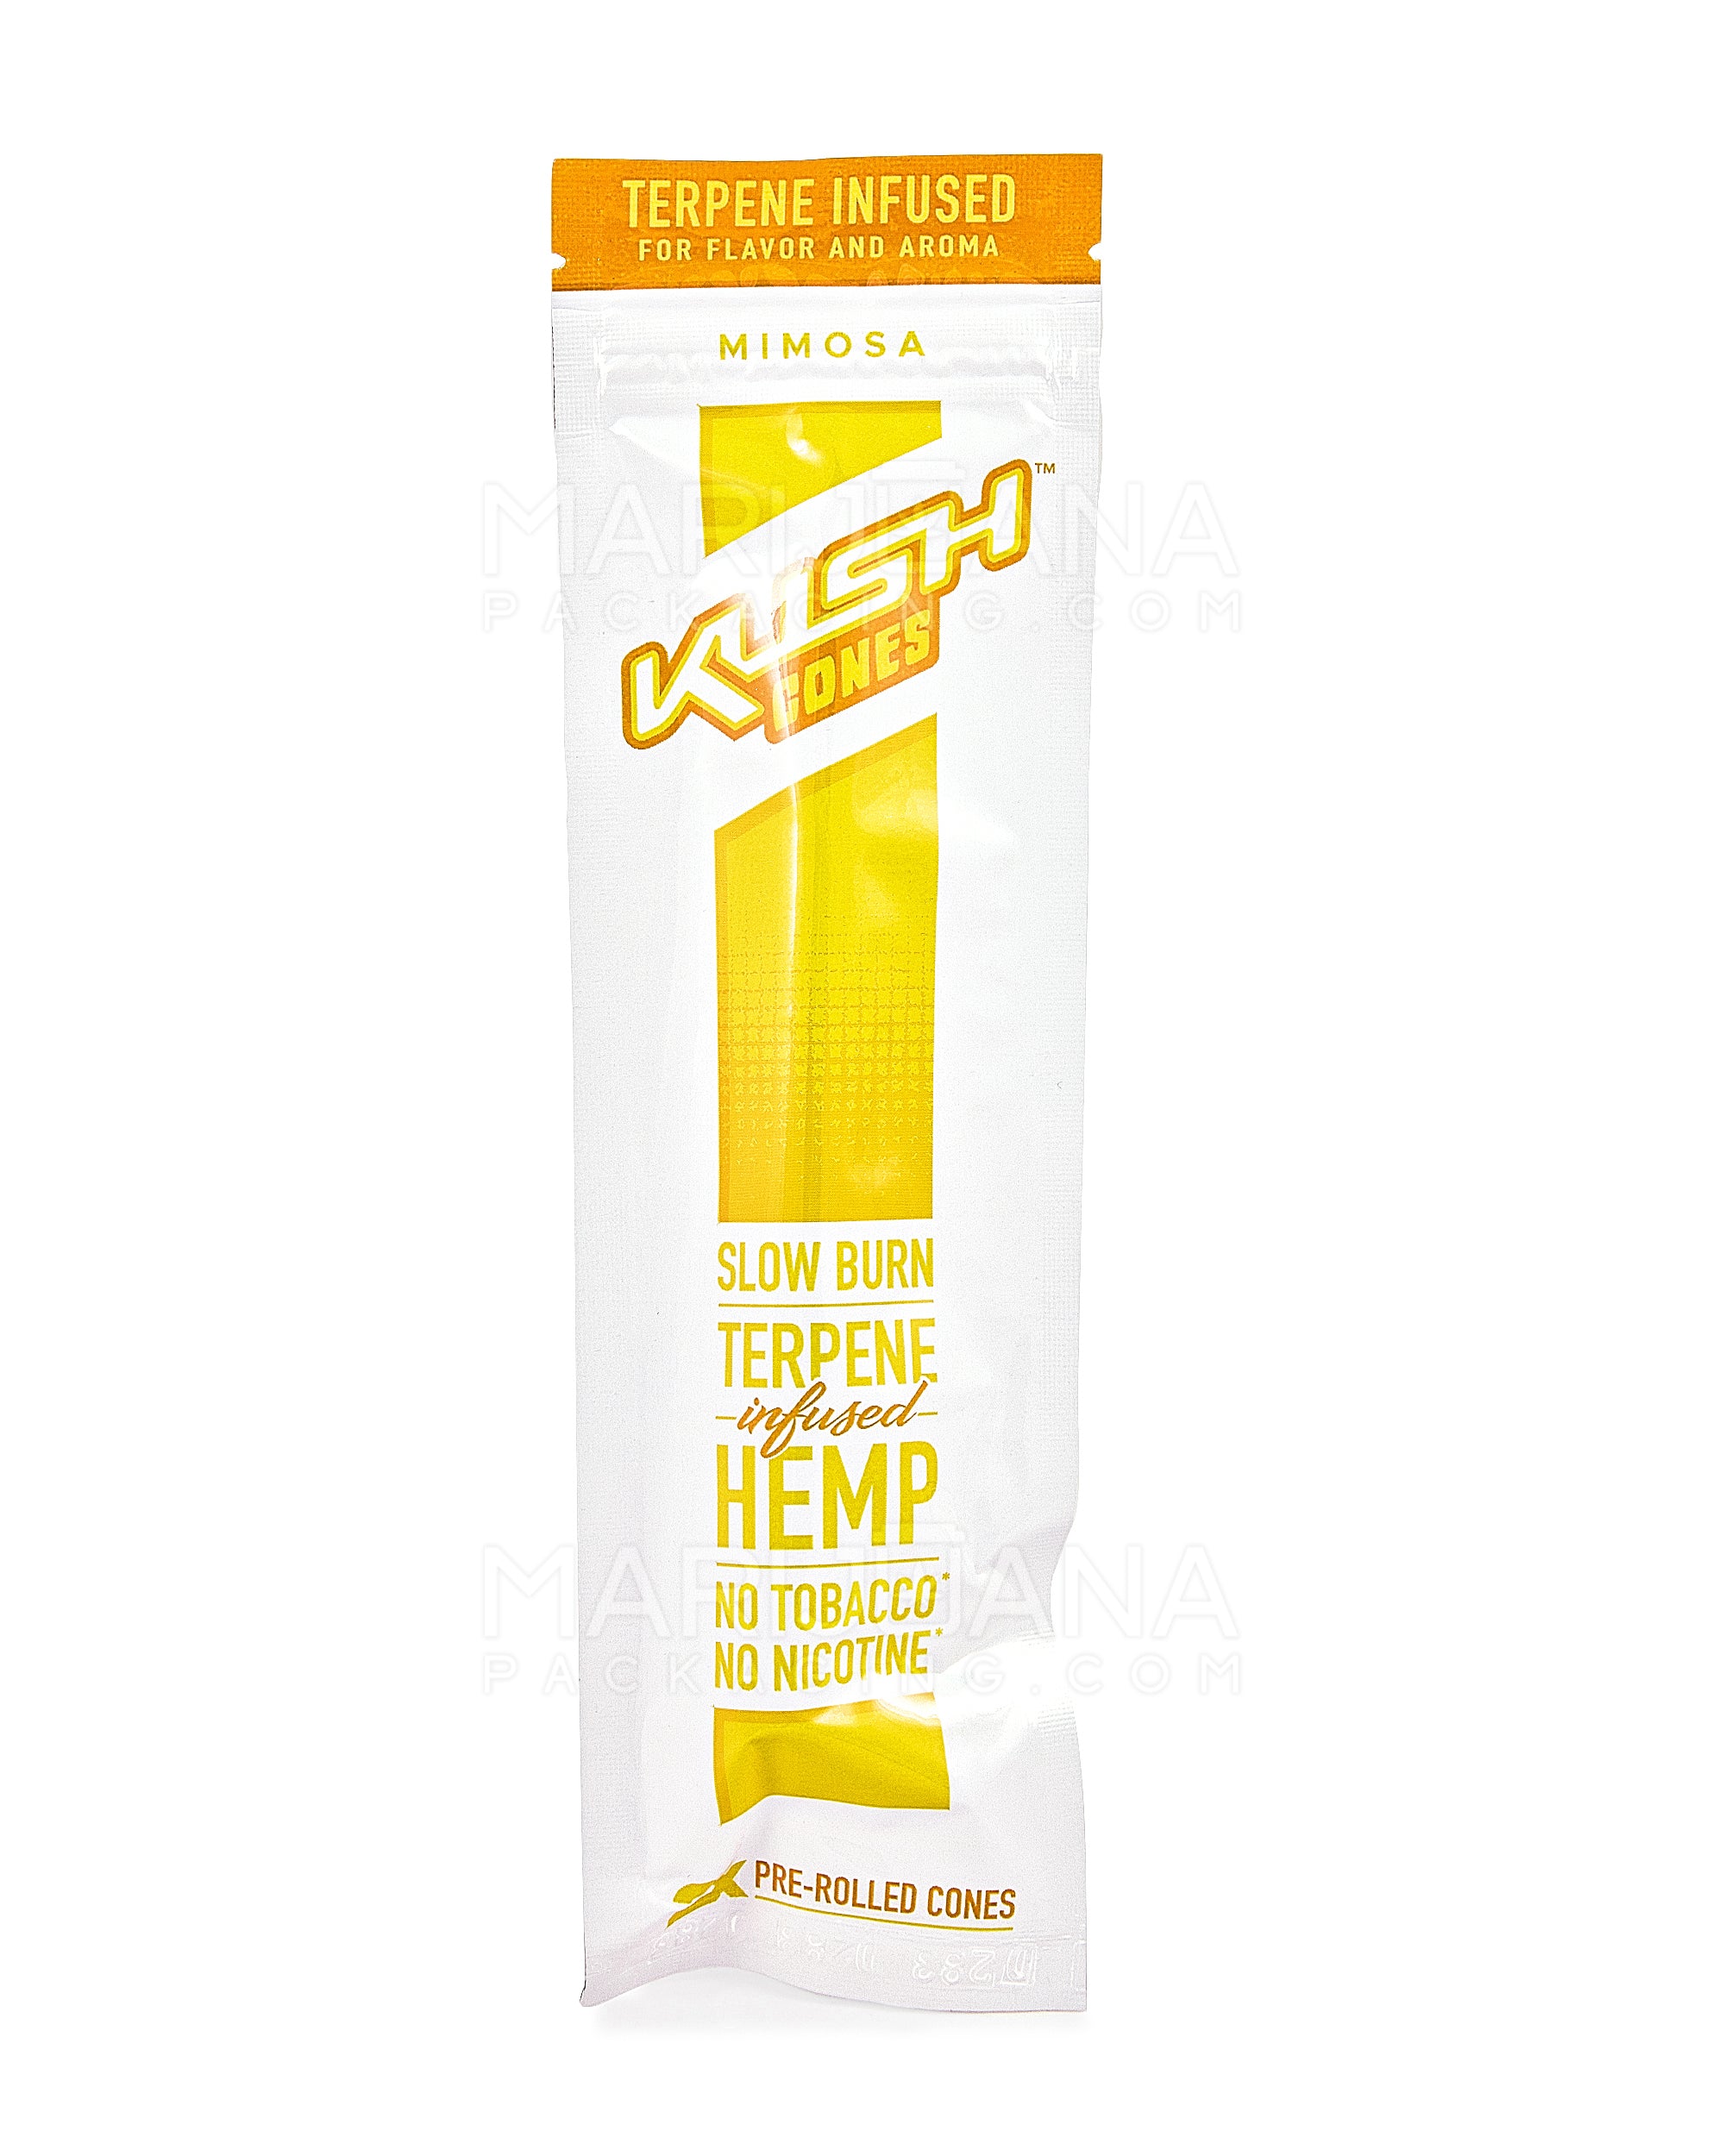 KUSH | 'Retail Display' Terpene Infused Herbal Conical Wraps | 160mm - Mimosa - 12 Count - 2